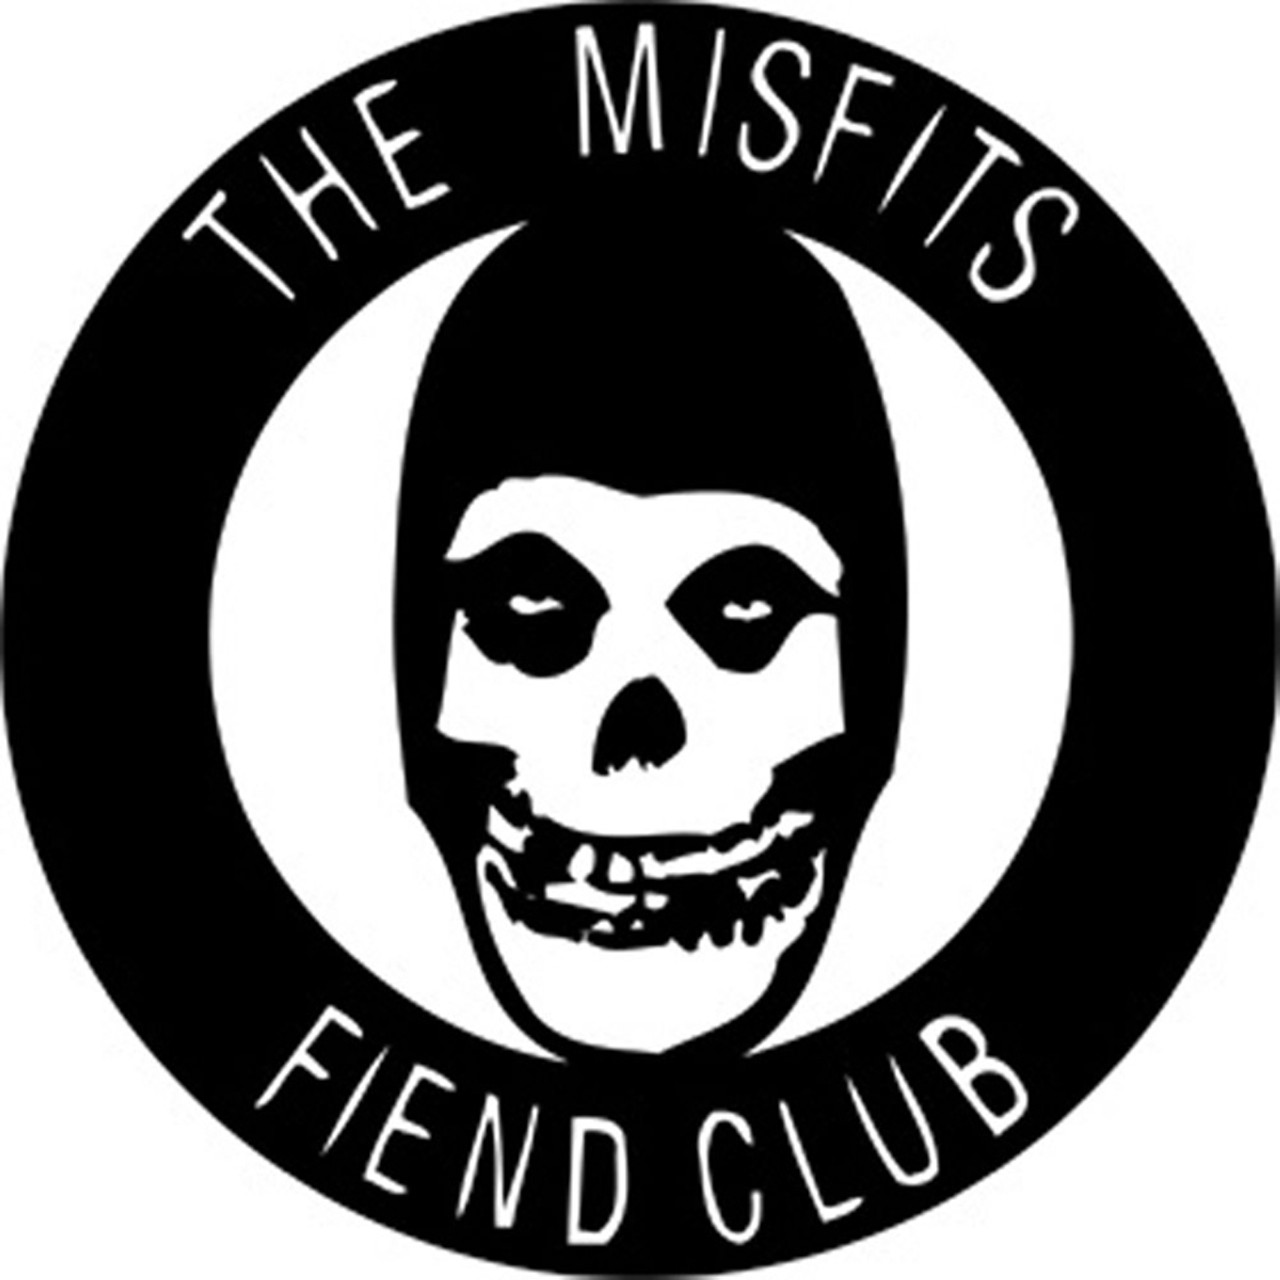 Saturday, Oct. 29Psycho 78 (Misfits Cover Band) at the Milk District Pavilion